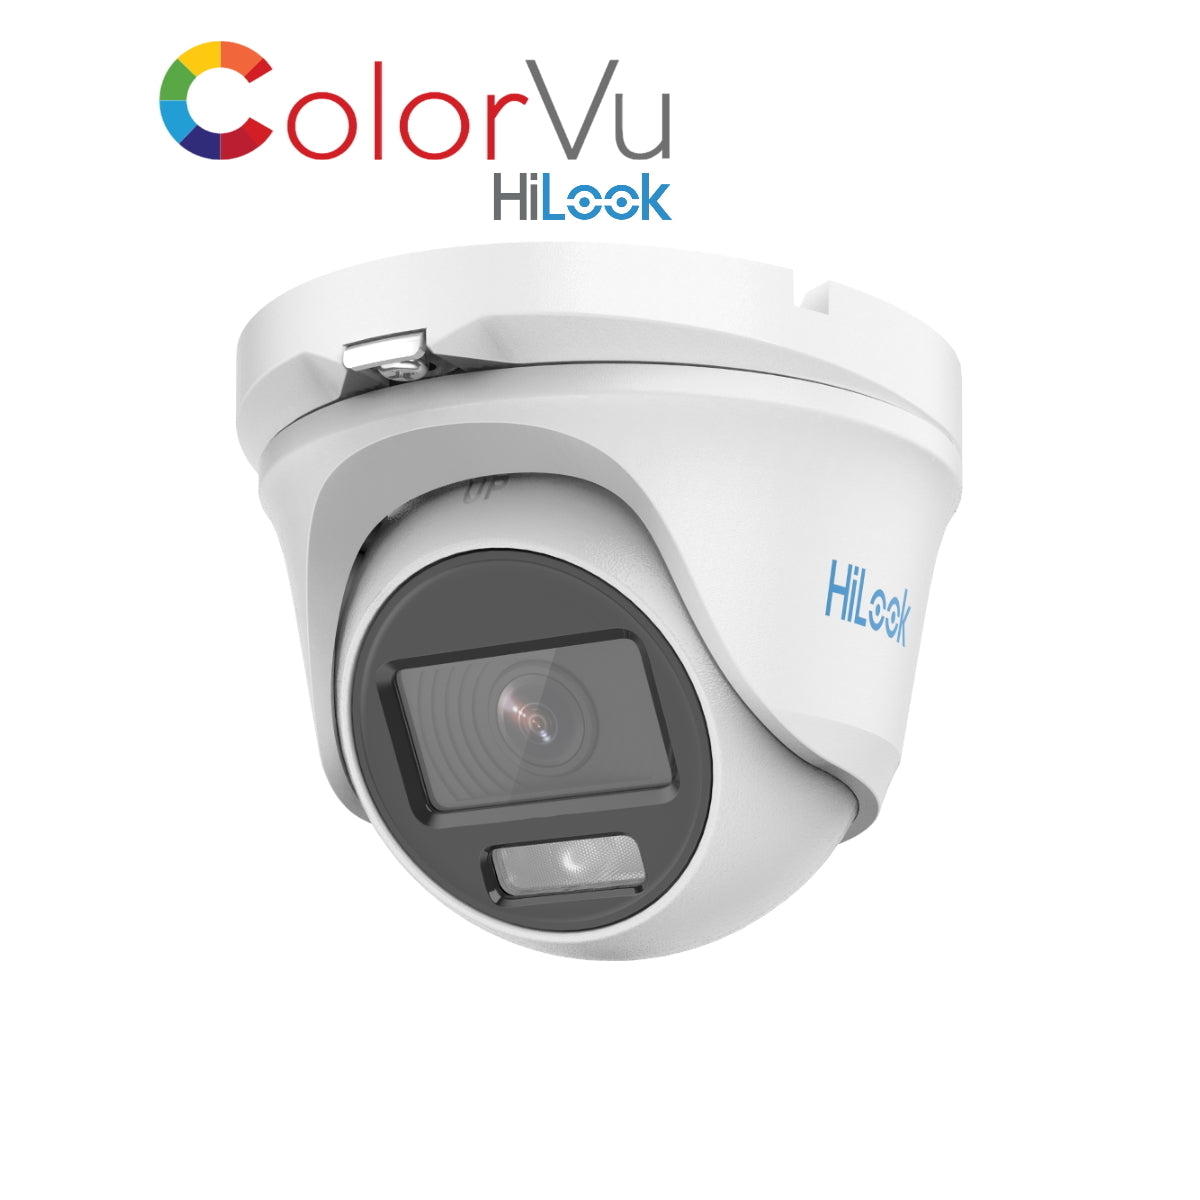 THC-T159-MS 2.8mm HiLook 5MP 3K ColorVu HD-TVI analogue turret camera with built-in mic and 20m LED